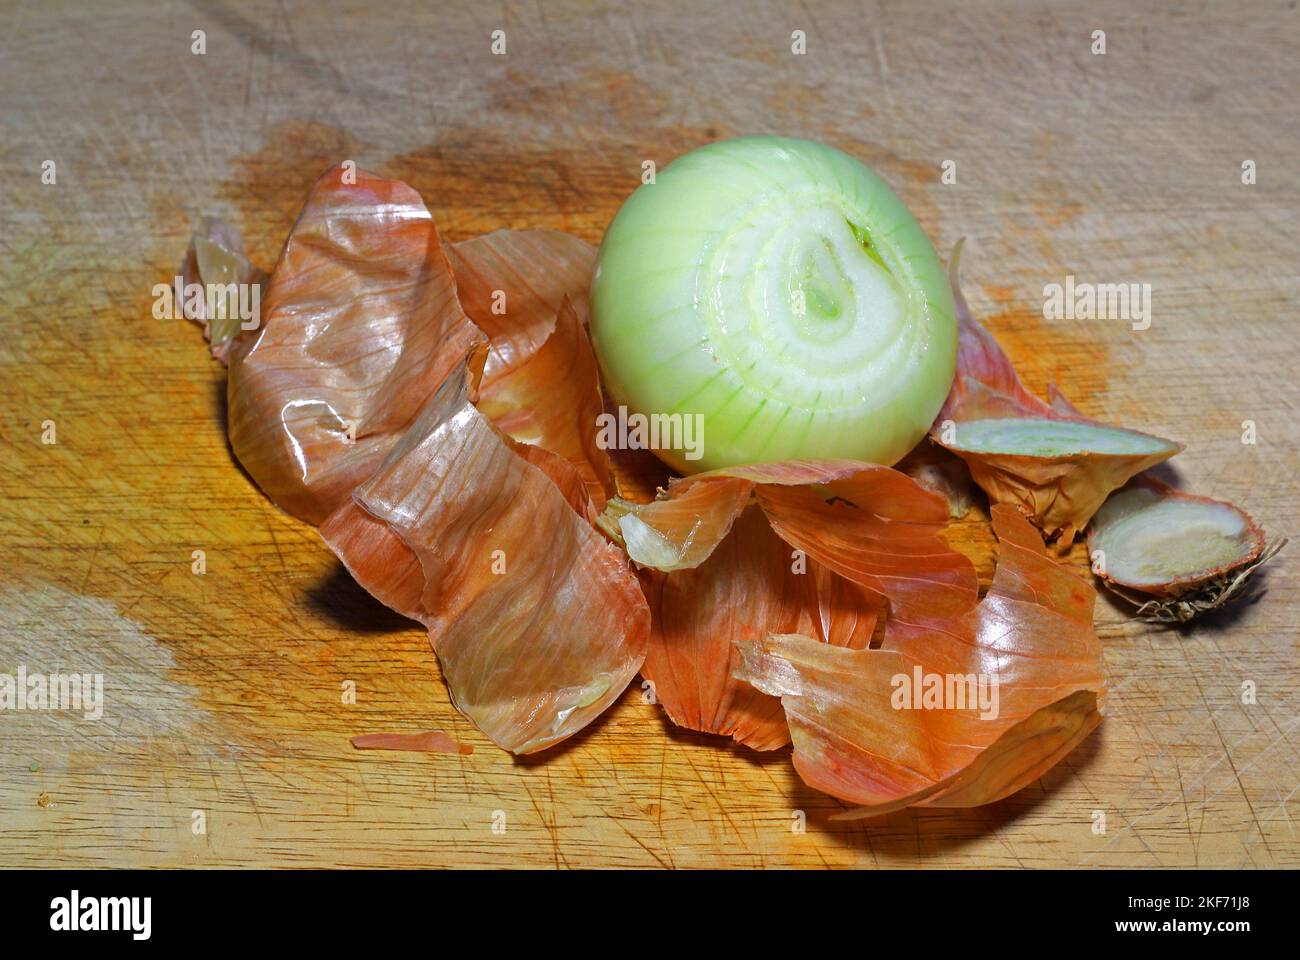 Peeled onion with the brown skin next to it. ready to chop on a wooden board. Stock Photo